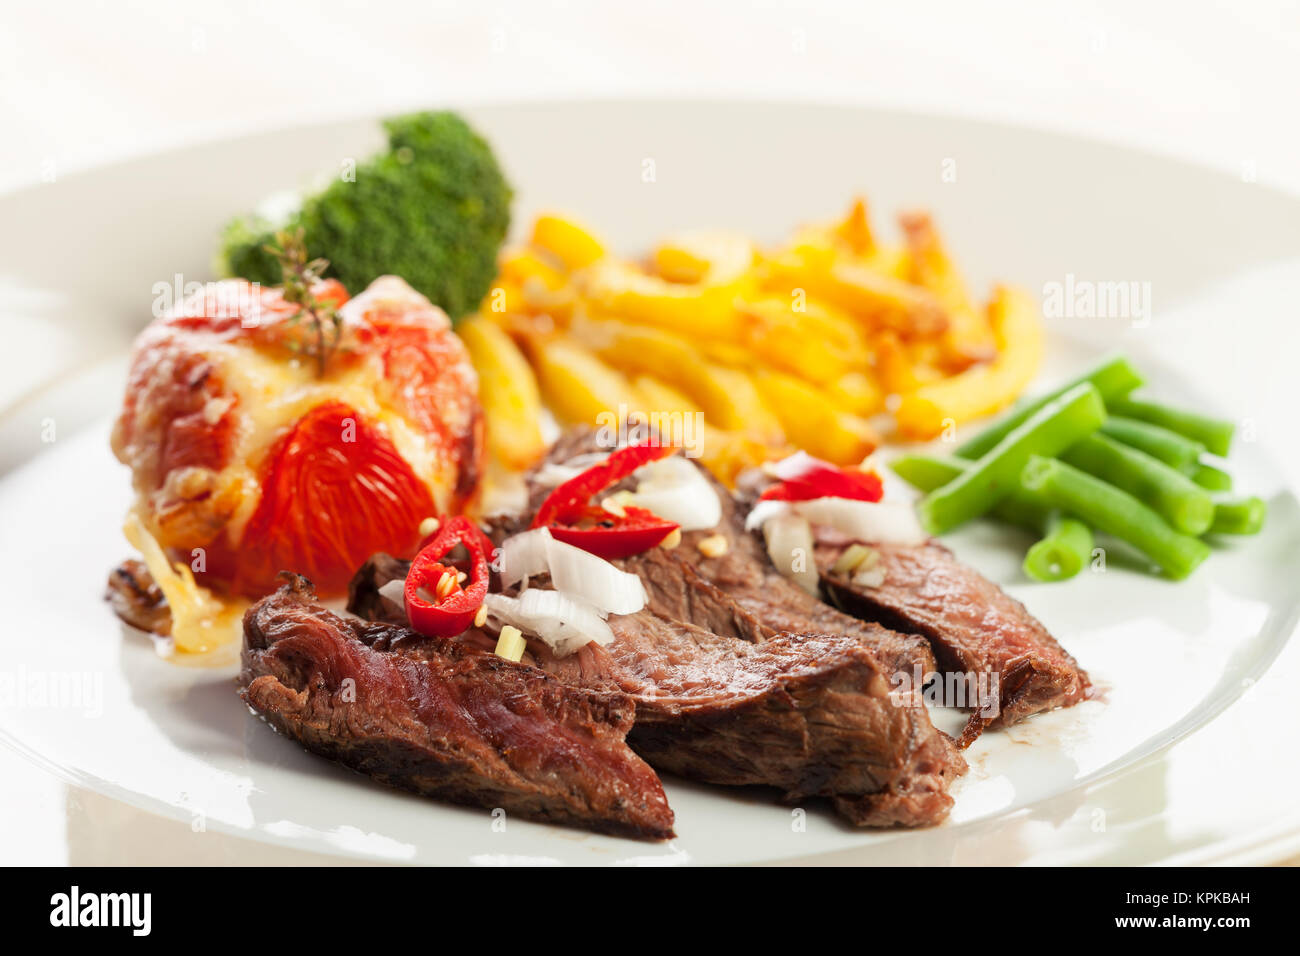 grilled steak with french fries and tomatoes Stock Photo